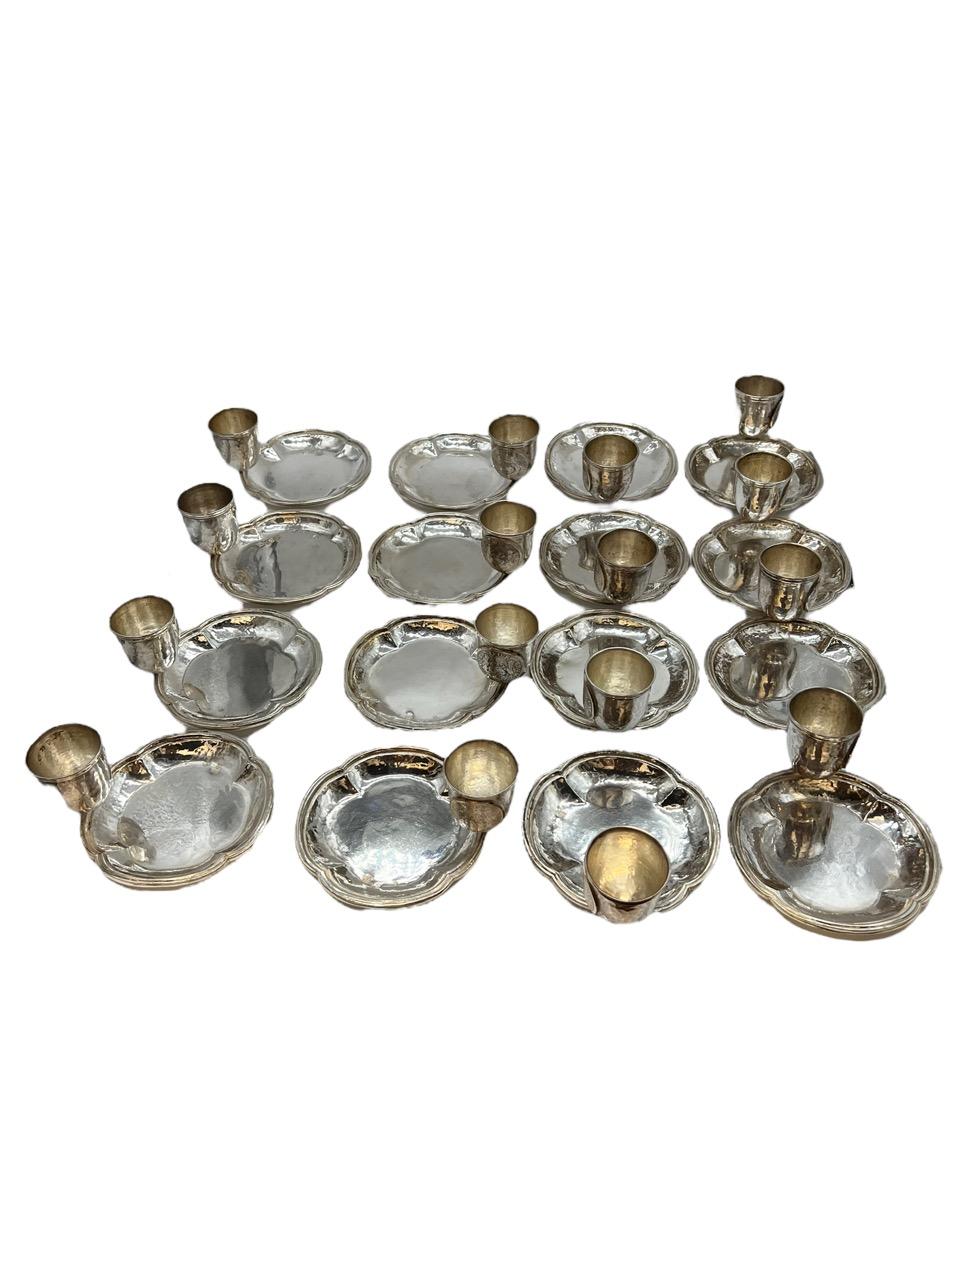 19th Century Set of Sixteen Spanish Sterling Silver Dishes with Bowl Attached In Fair Condition For Sale In North Miami, FL